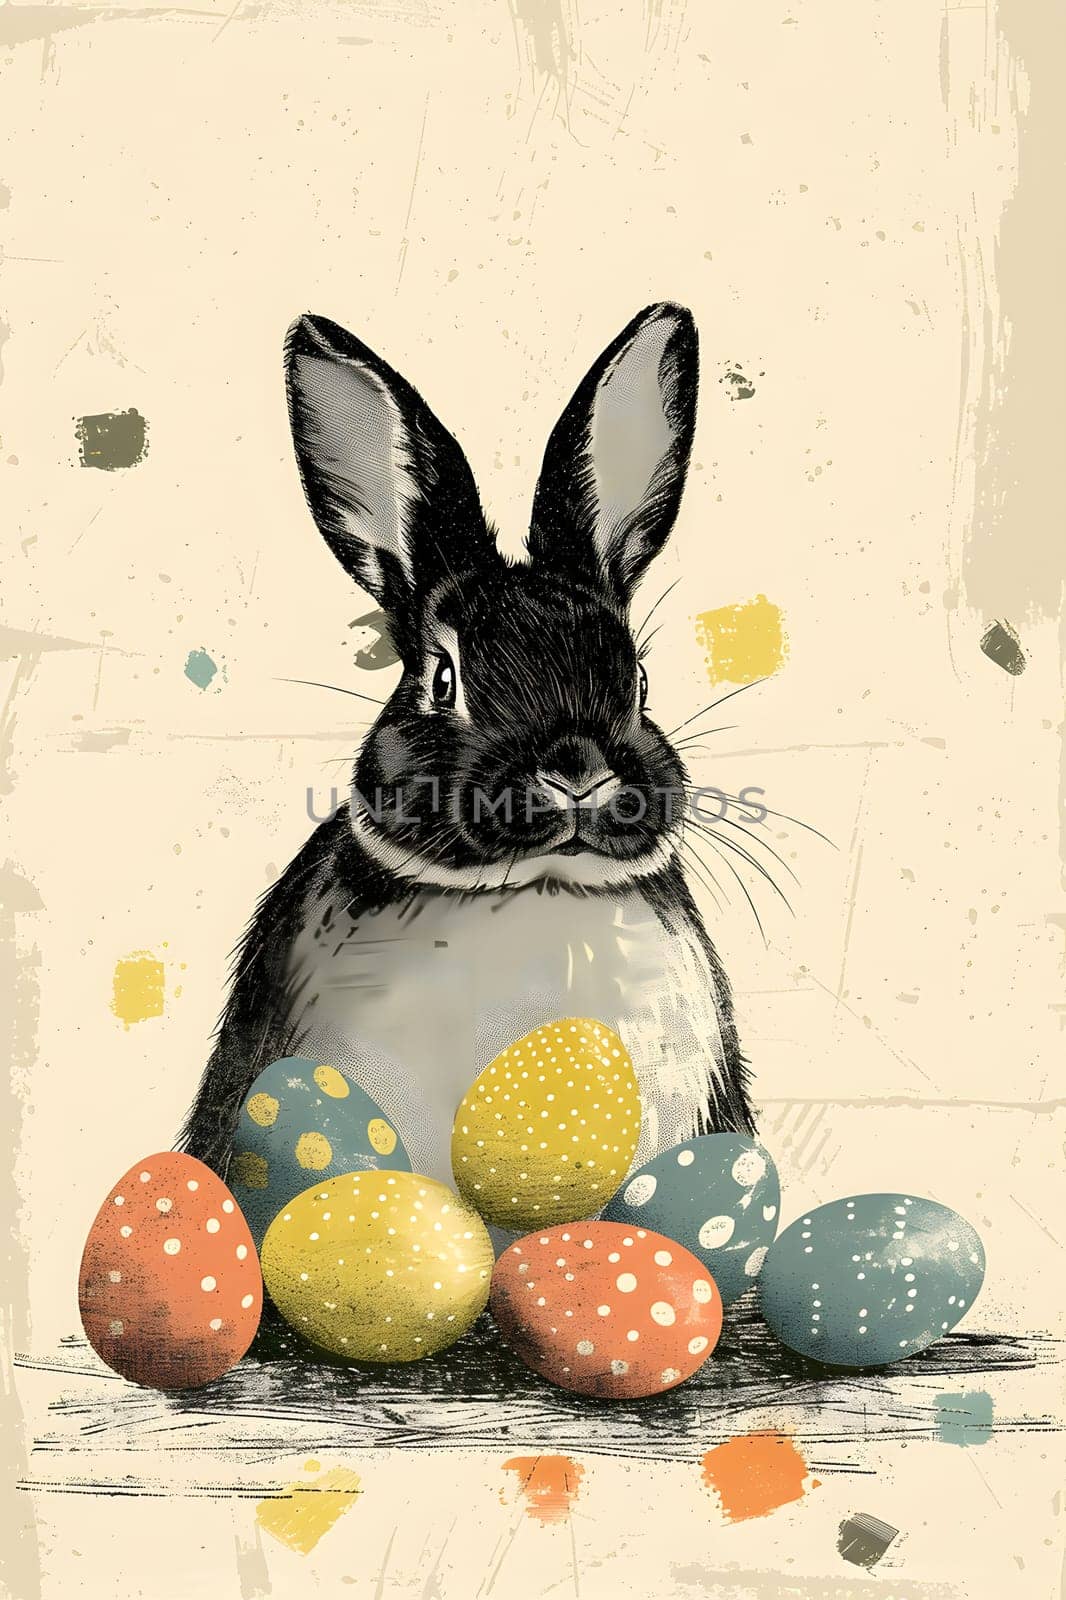 A hare, a type of rabbit, sits beside a collection of Easter eggs. This terrestrial animal is a common subject in visual arts and paintings, often depicted as a working animal during events